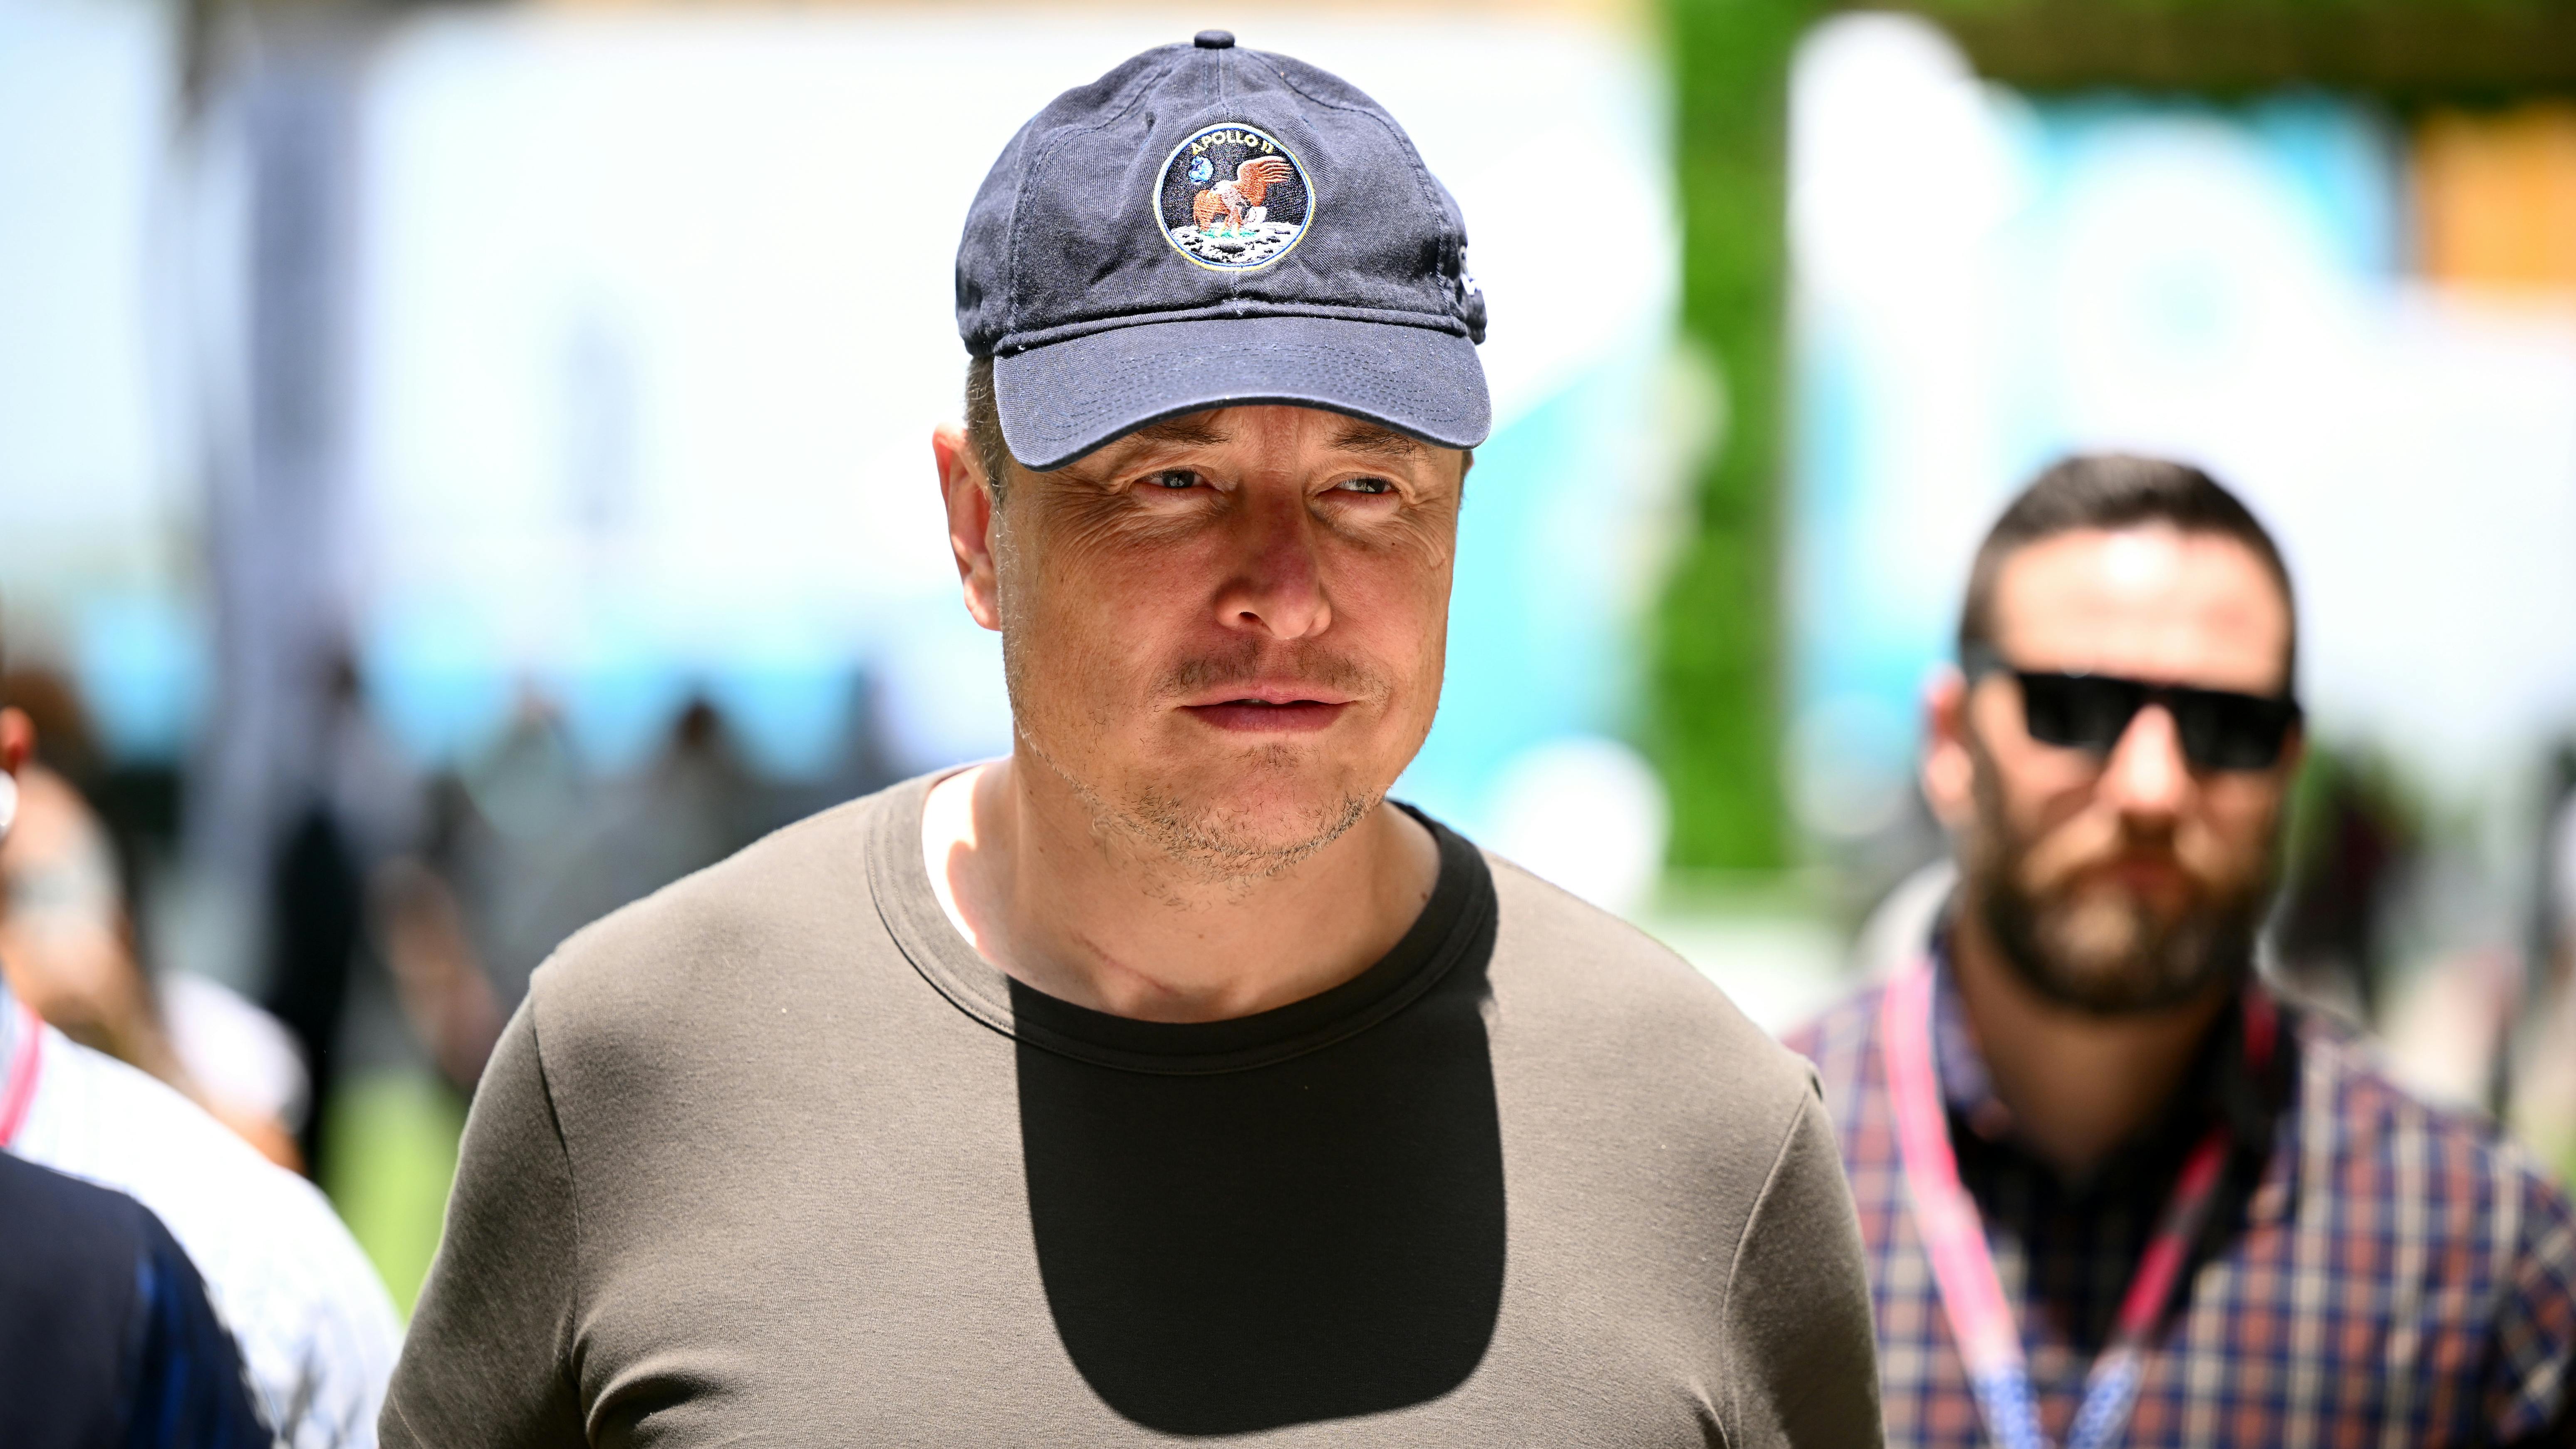 Elon Musk's Short Shorts Sell Out in Minutes